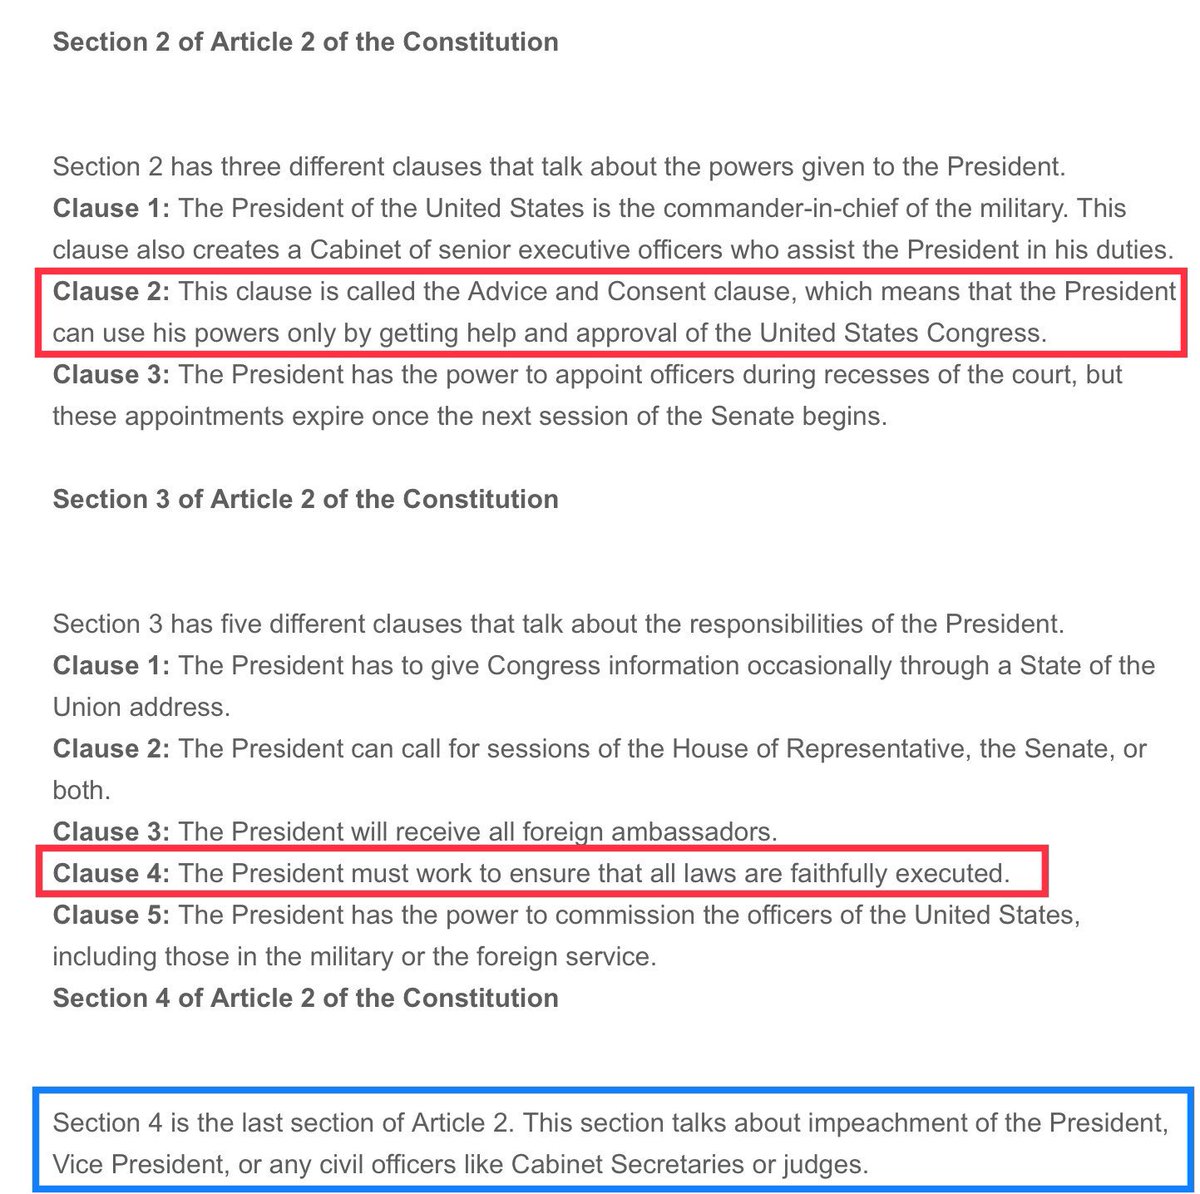 @atrupar Couple of Article 2 reminders for Trump: - Secrion 1, oath of office - Secrion 2, advise and consent - Secrion 3, uphold laws of US - and my personal favorite. Section 4. Impeachment WHICH EVERYONE IS TALKING ABOUT